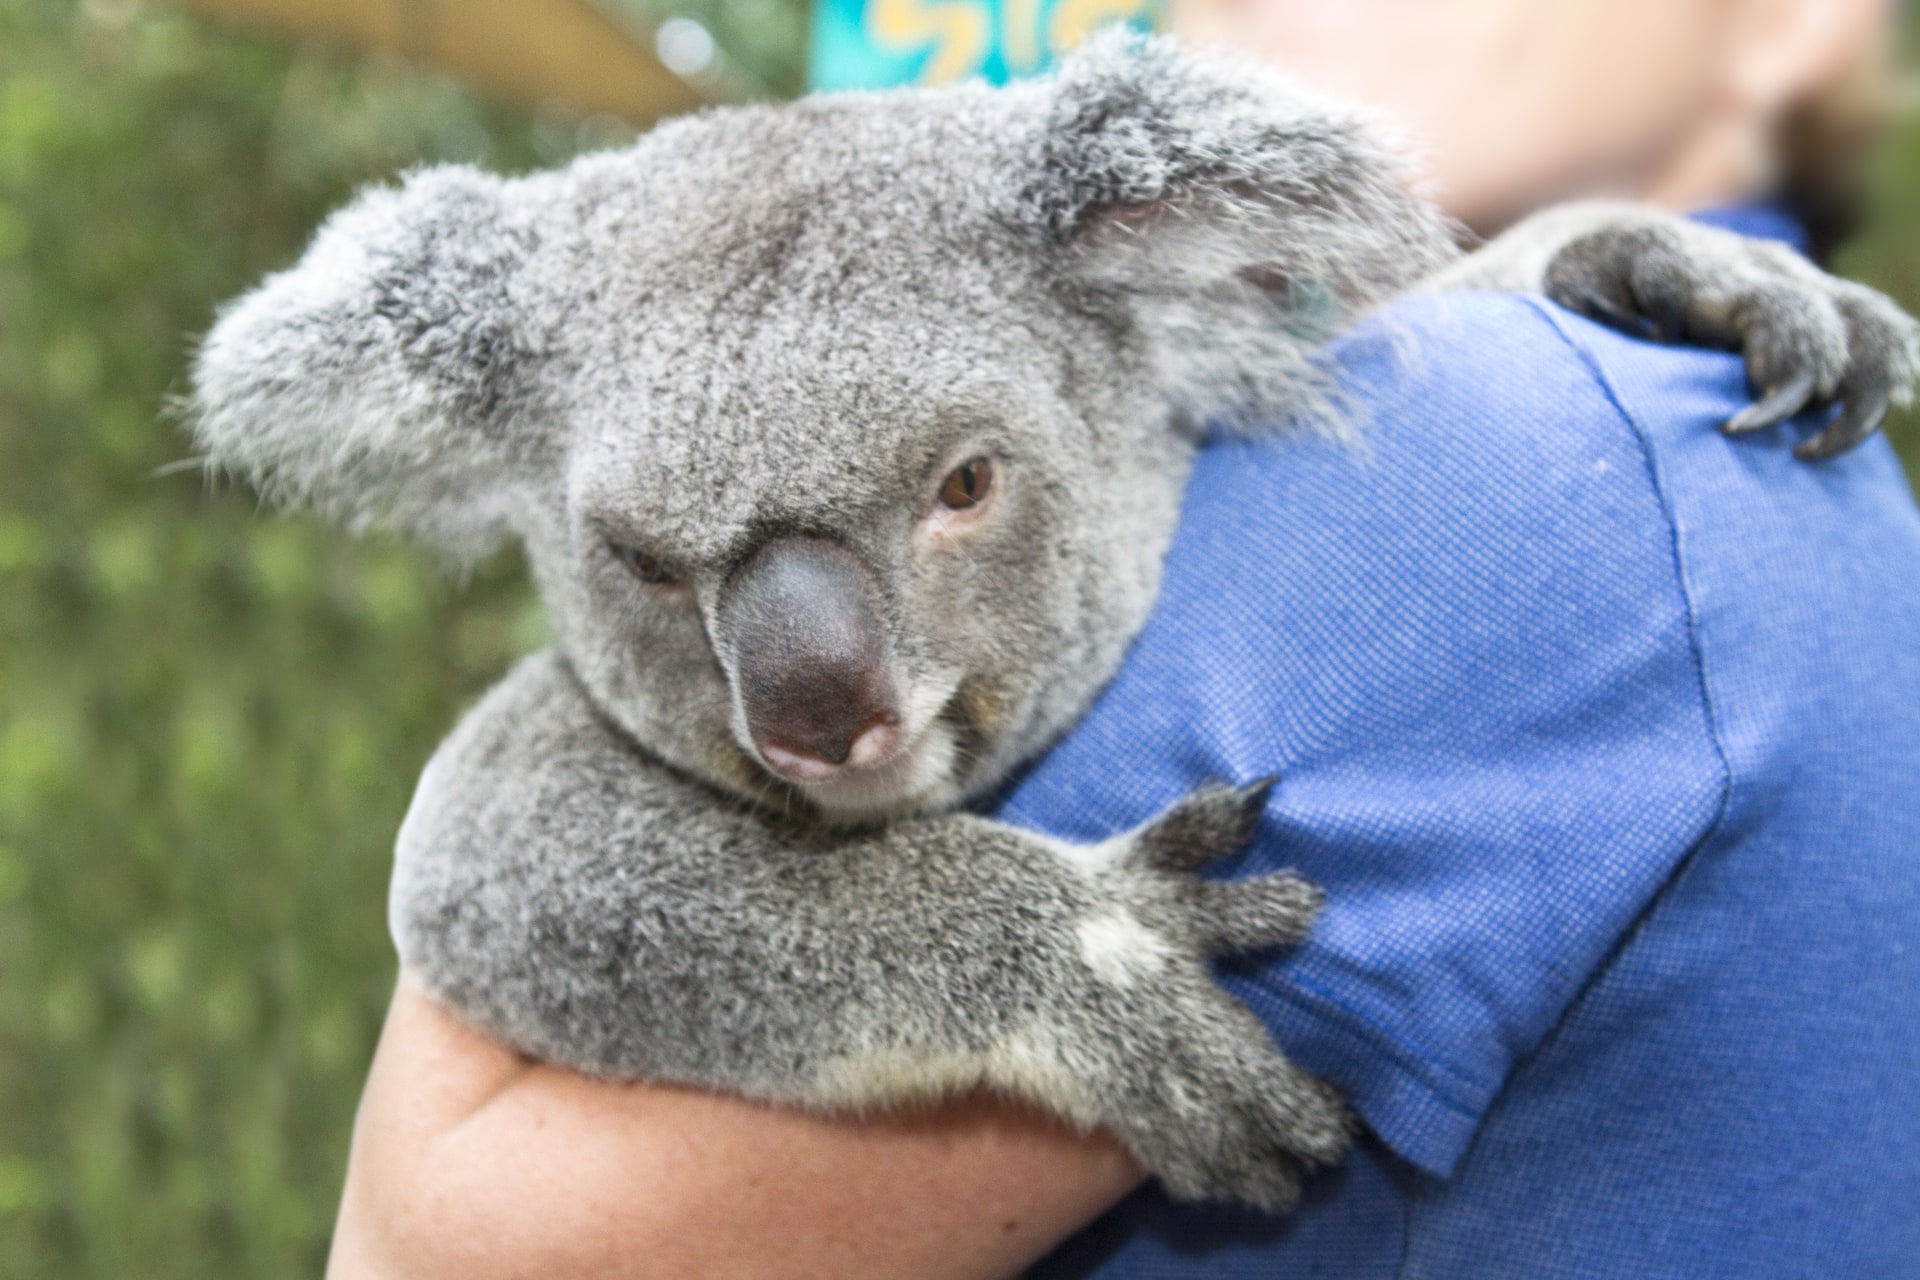 Koala being held by person in blue shirt